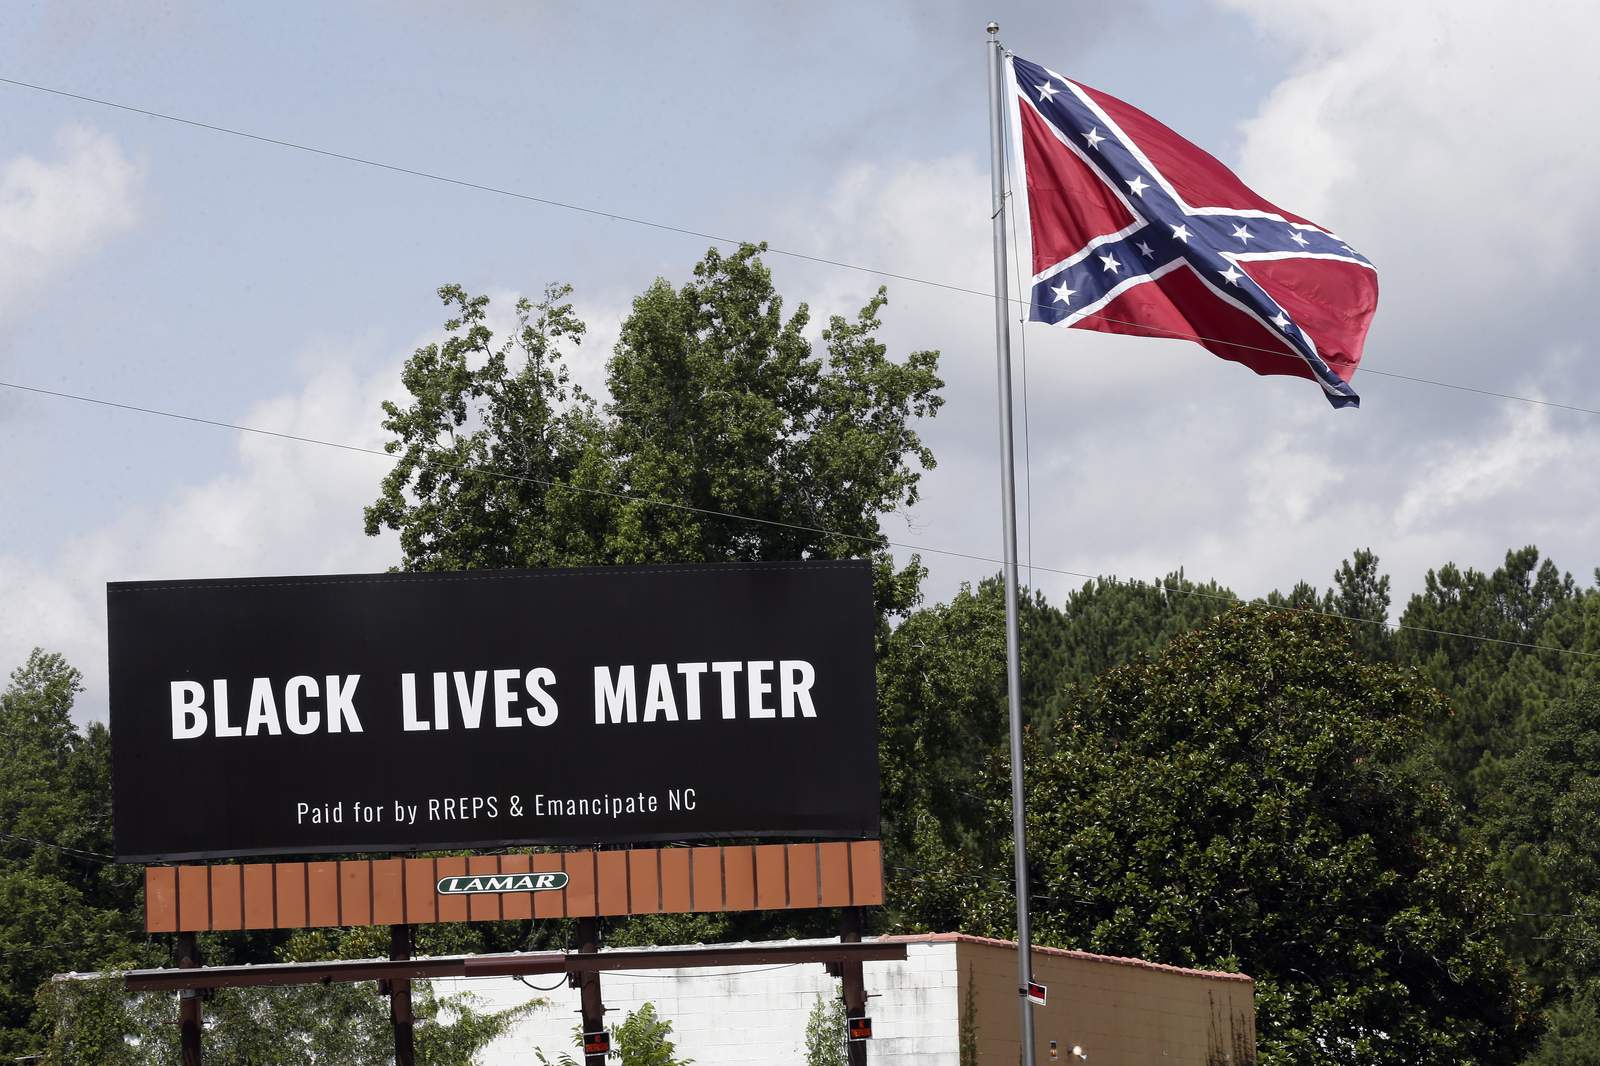 Black Lives Matter billboard placed next to Confederate flag